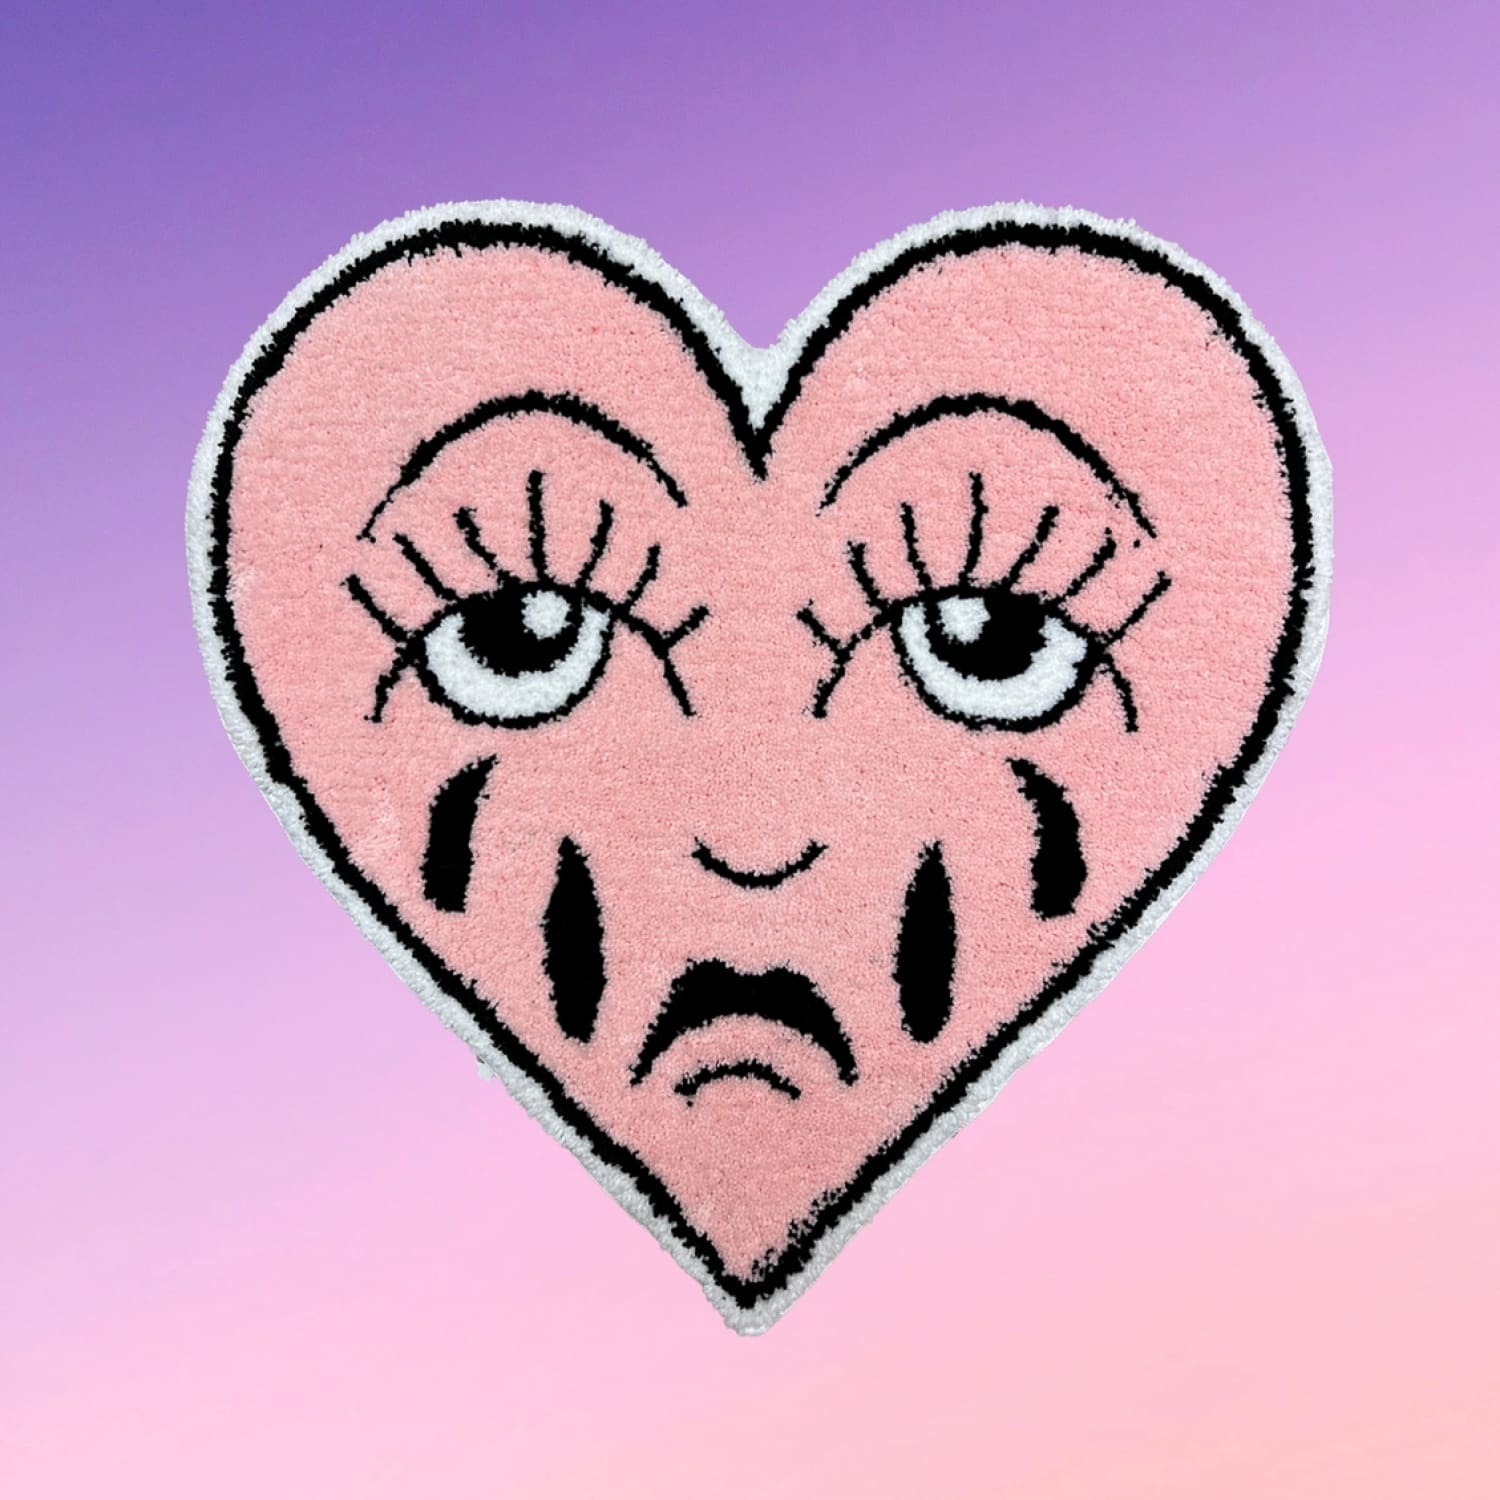 Crying Heart Rug Accent - Bad Bitch Home Decor Kitsch